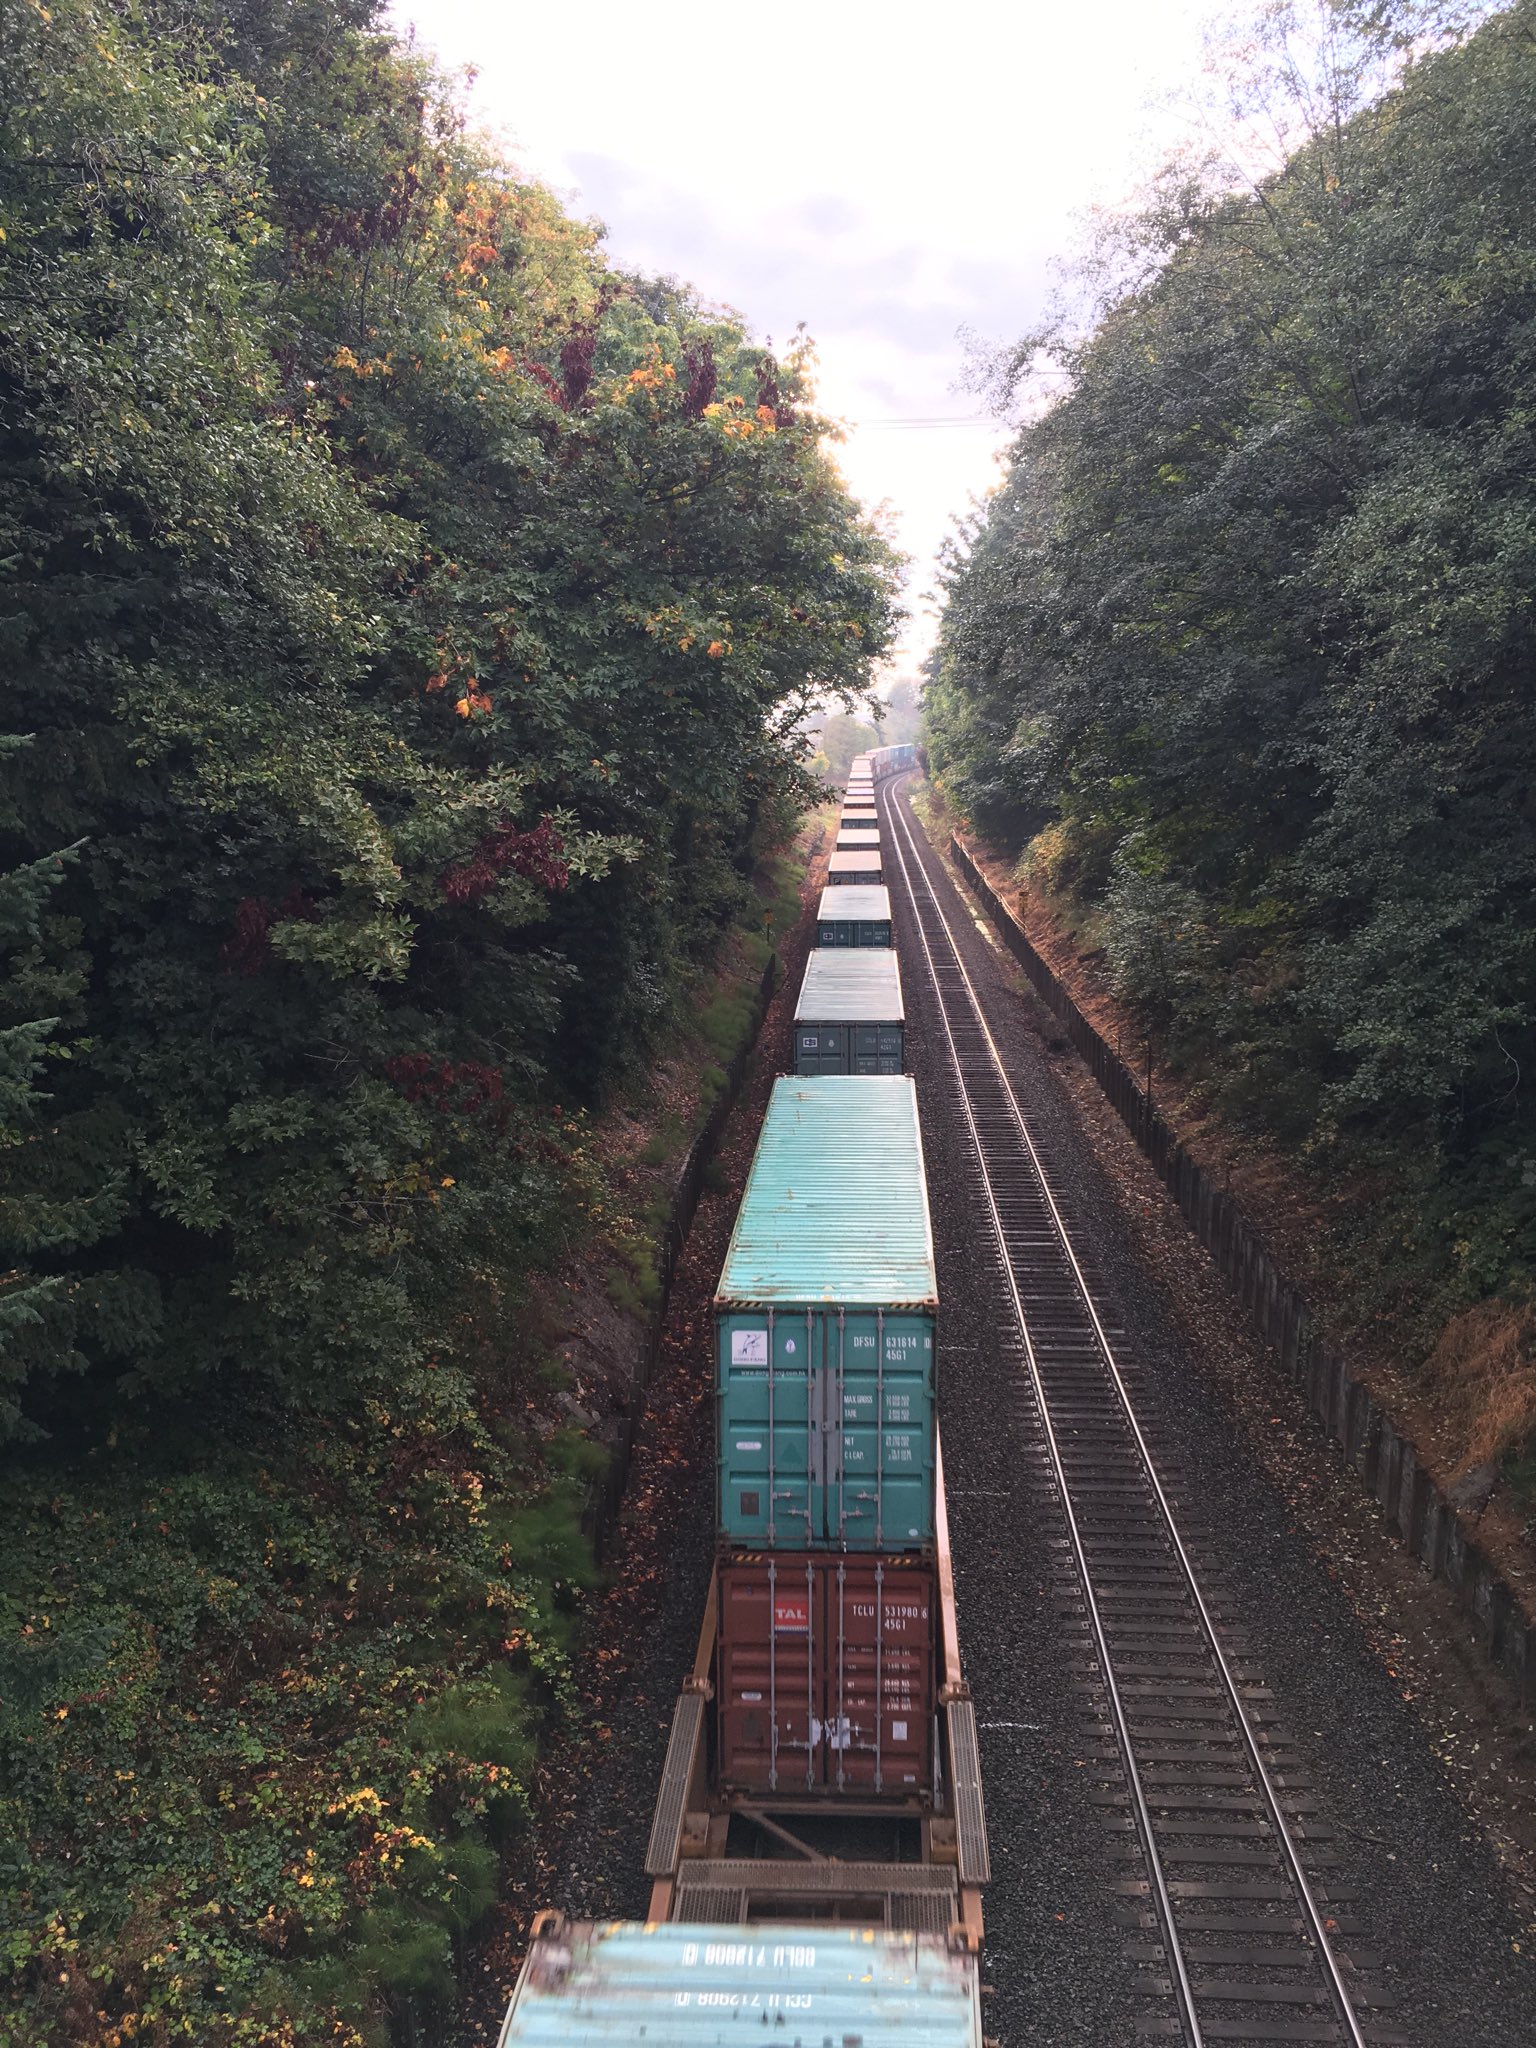 Picture is taken on a bridge looking down at railroad tracks. There are two sets of tracks and the left tracks are occupied by double decker boxcars. On either side of the tracks are lush green trees.